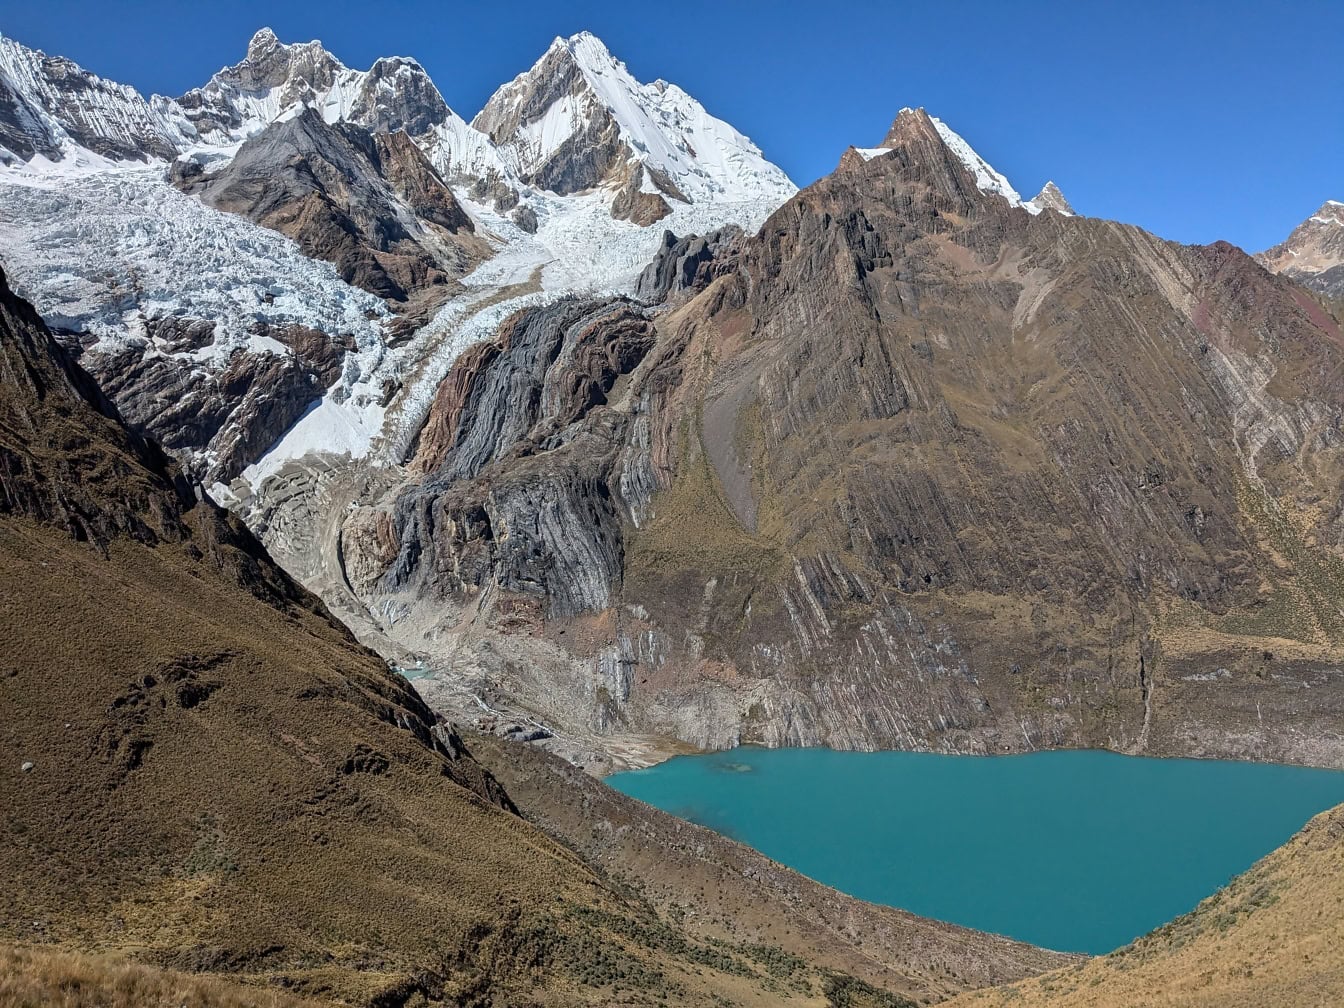 Landscape of a turquoise Llanguanco lake, a scenic view of a Cordillera Huayhuash a mountain range in the Andes in Peru in Latin America